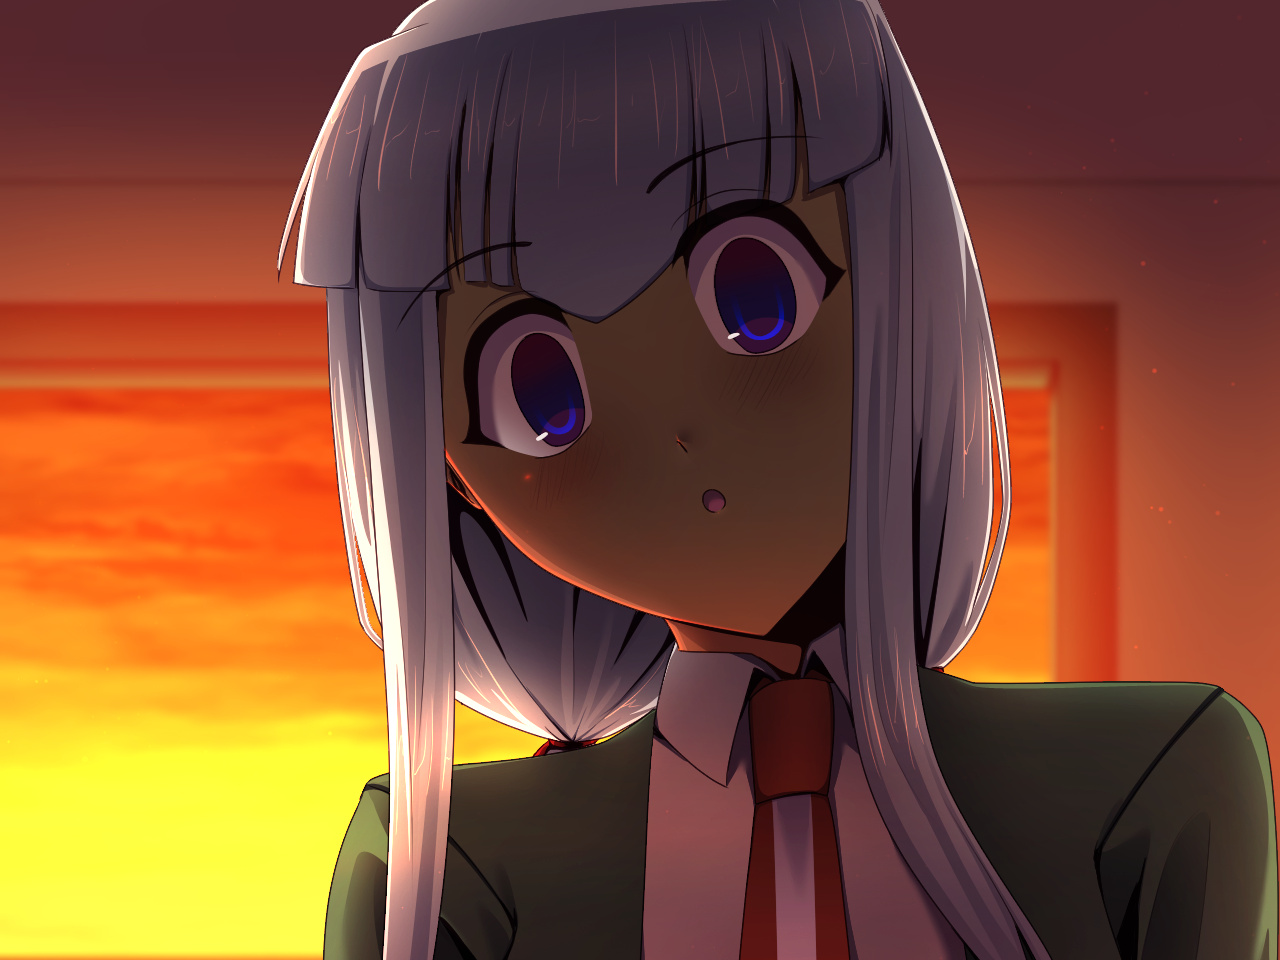 CG of Auma looking down at the viewer while in a classroom in the afternoon. Her eyes are a bit wide and she's blushing.